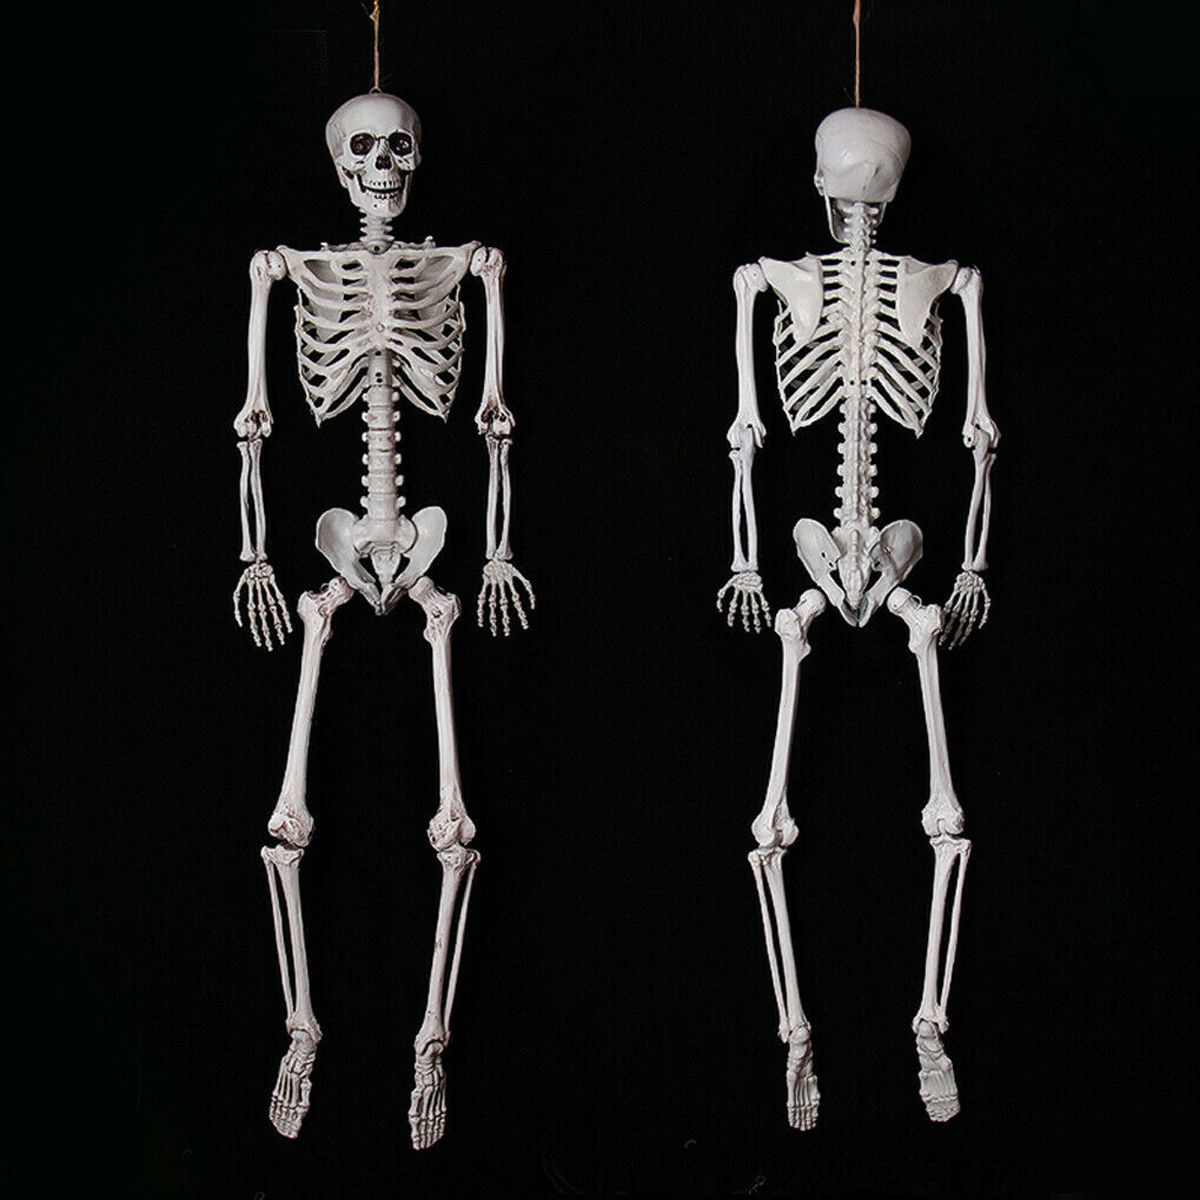 90cm-Human-Skeleton-Scary-Bones-Poseable-Hanging-Halloween-Prop-Party-Decorations-1573645